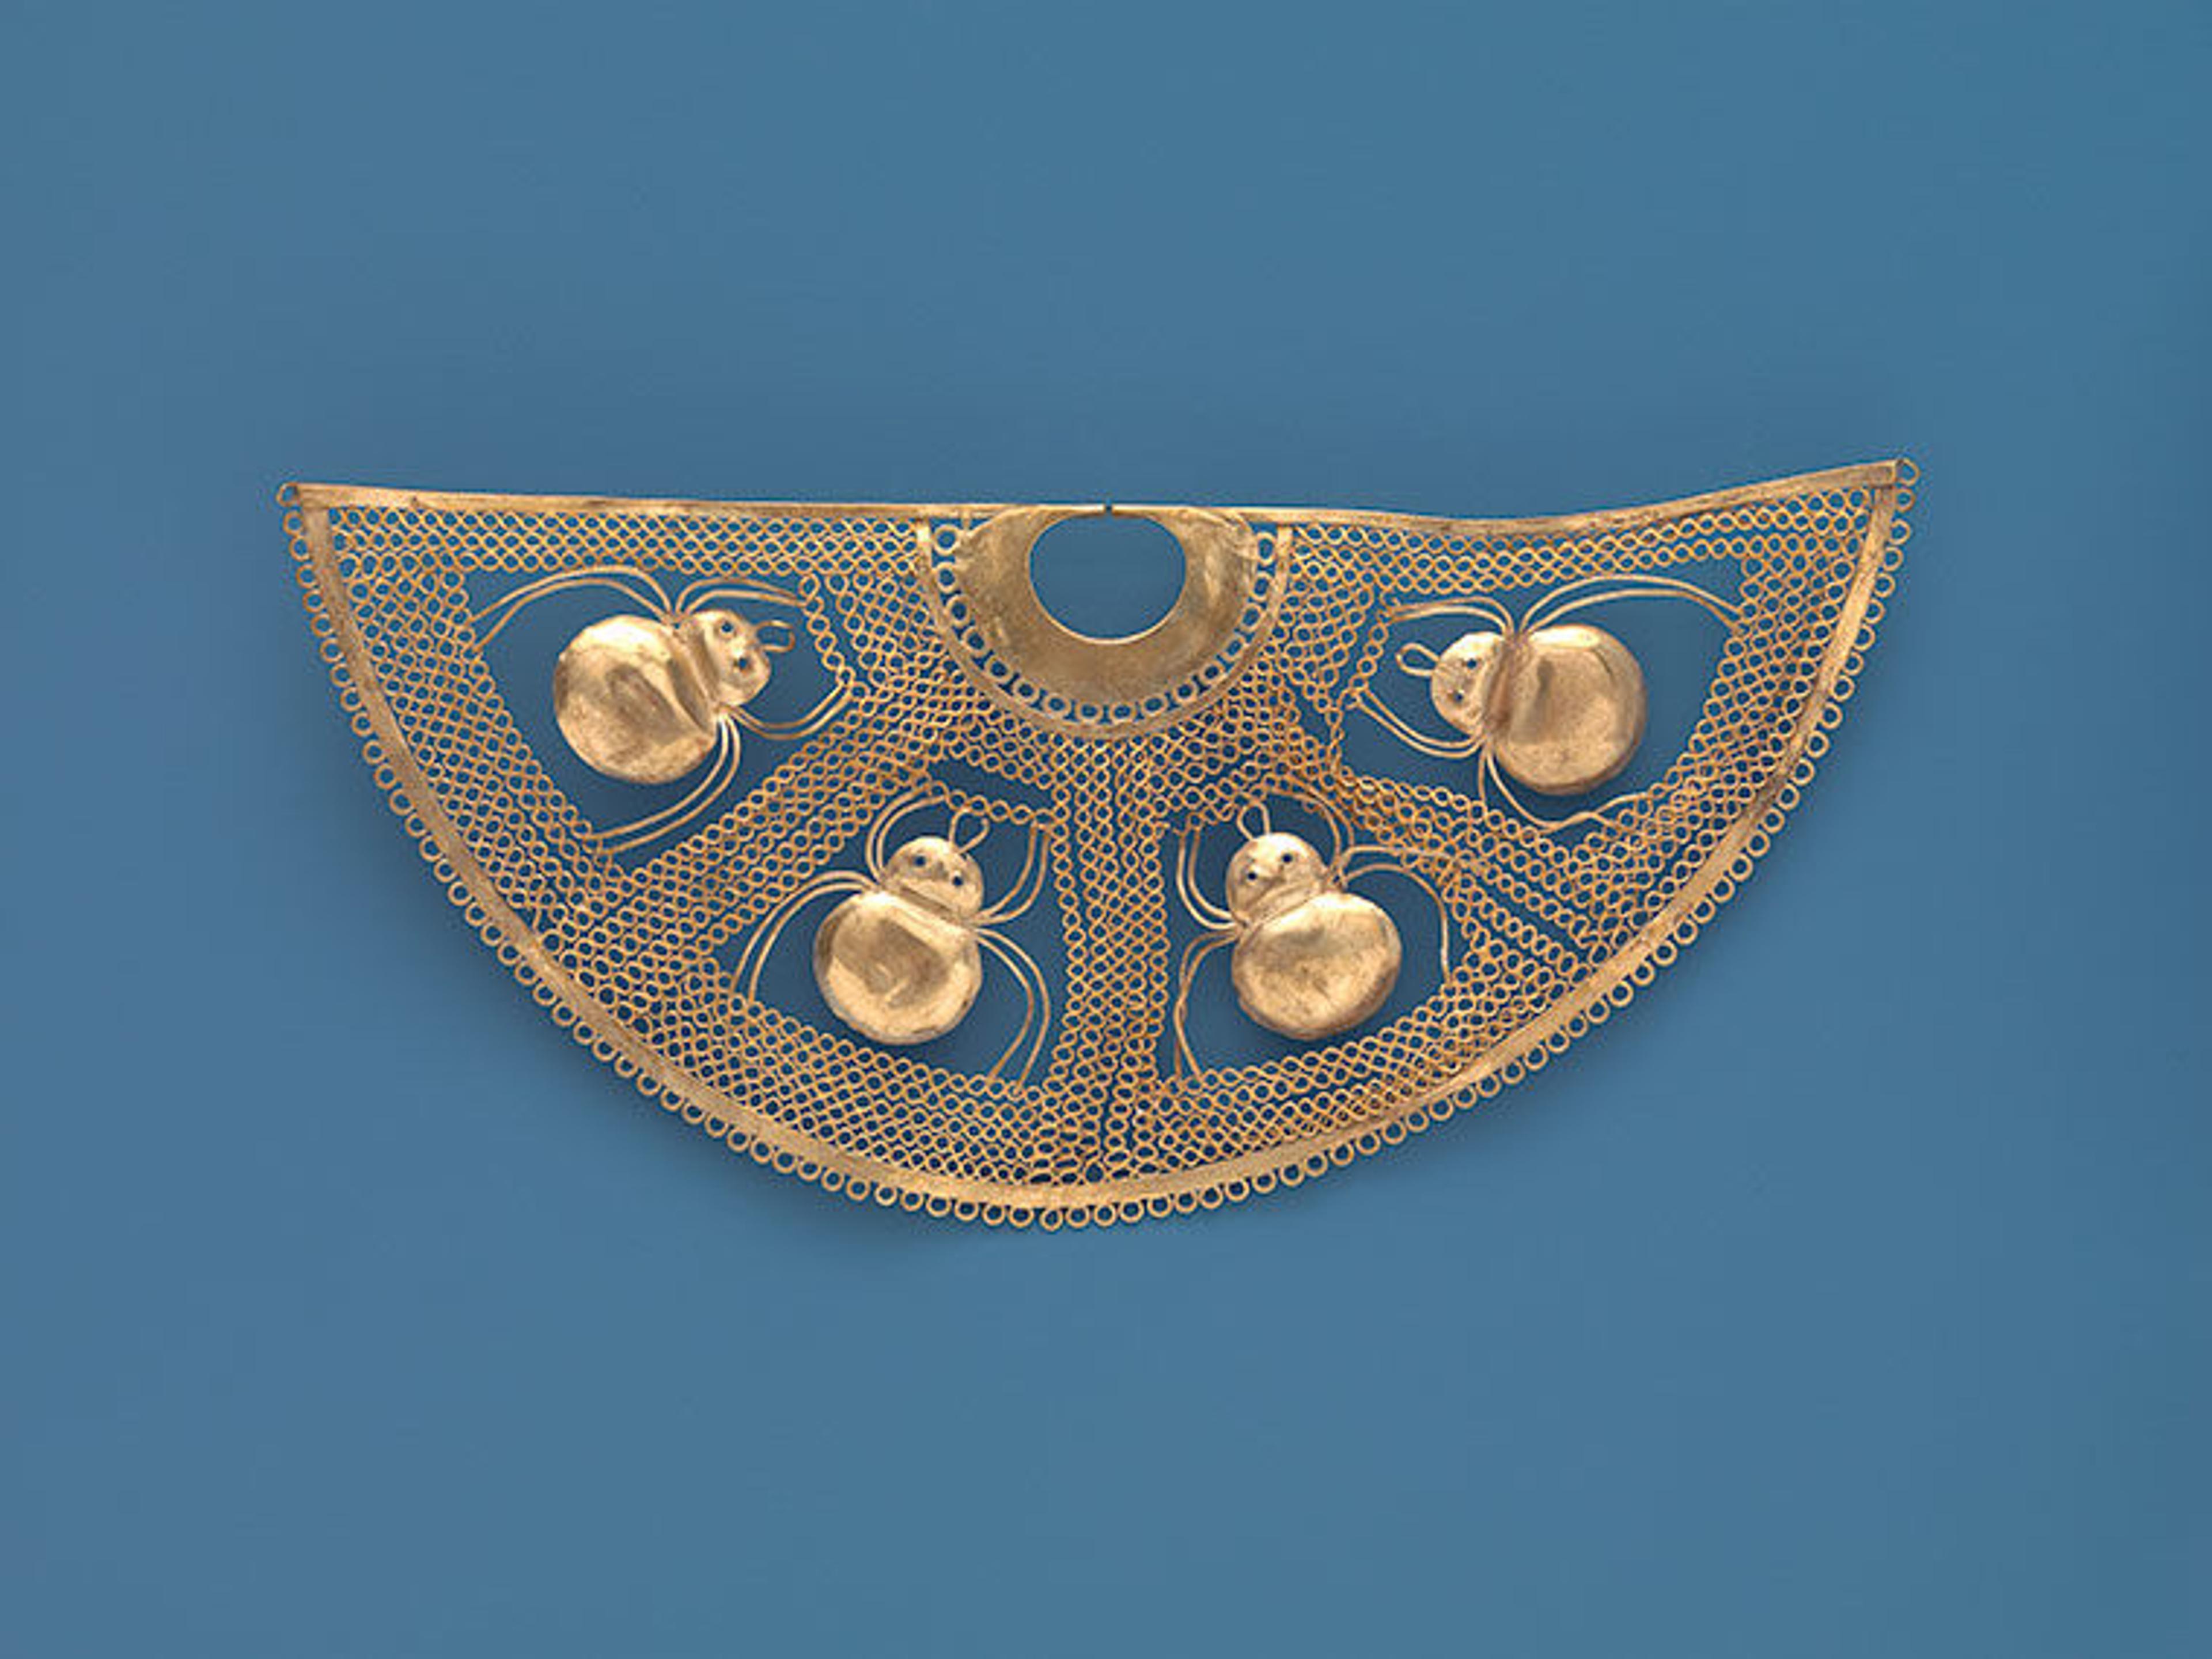 The gold nose ornament is shown on a blue background, accentuating all the details. 